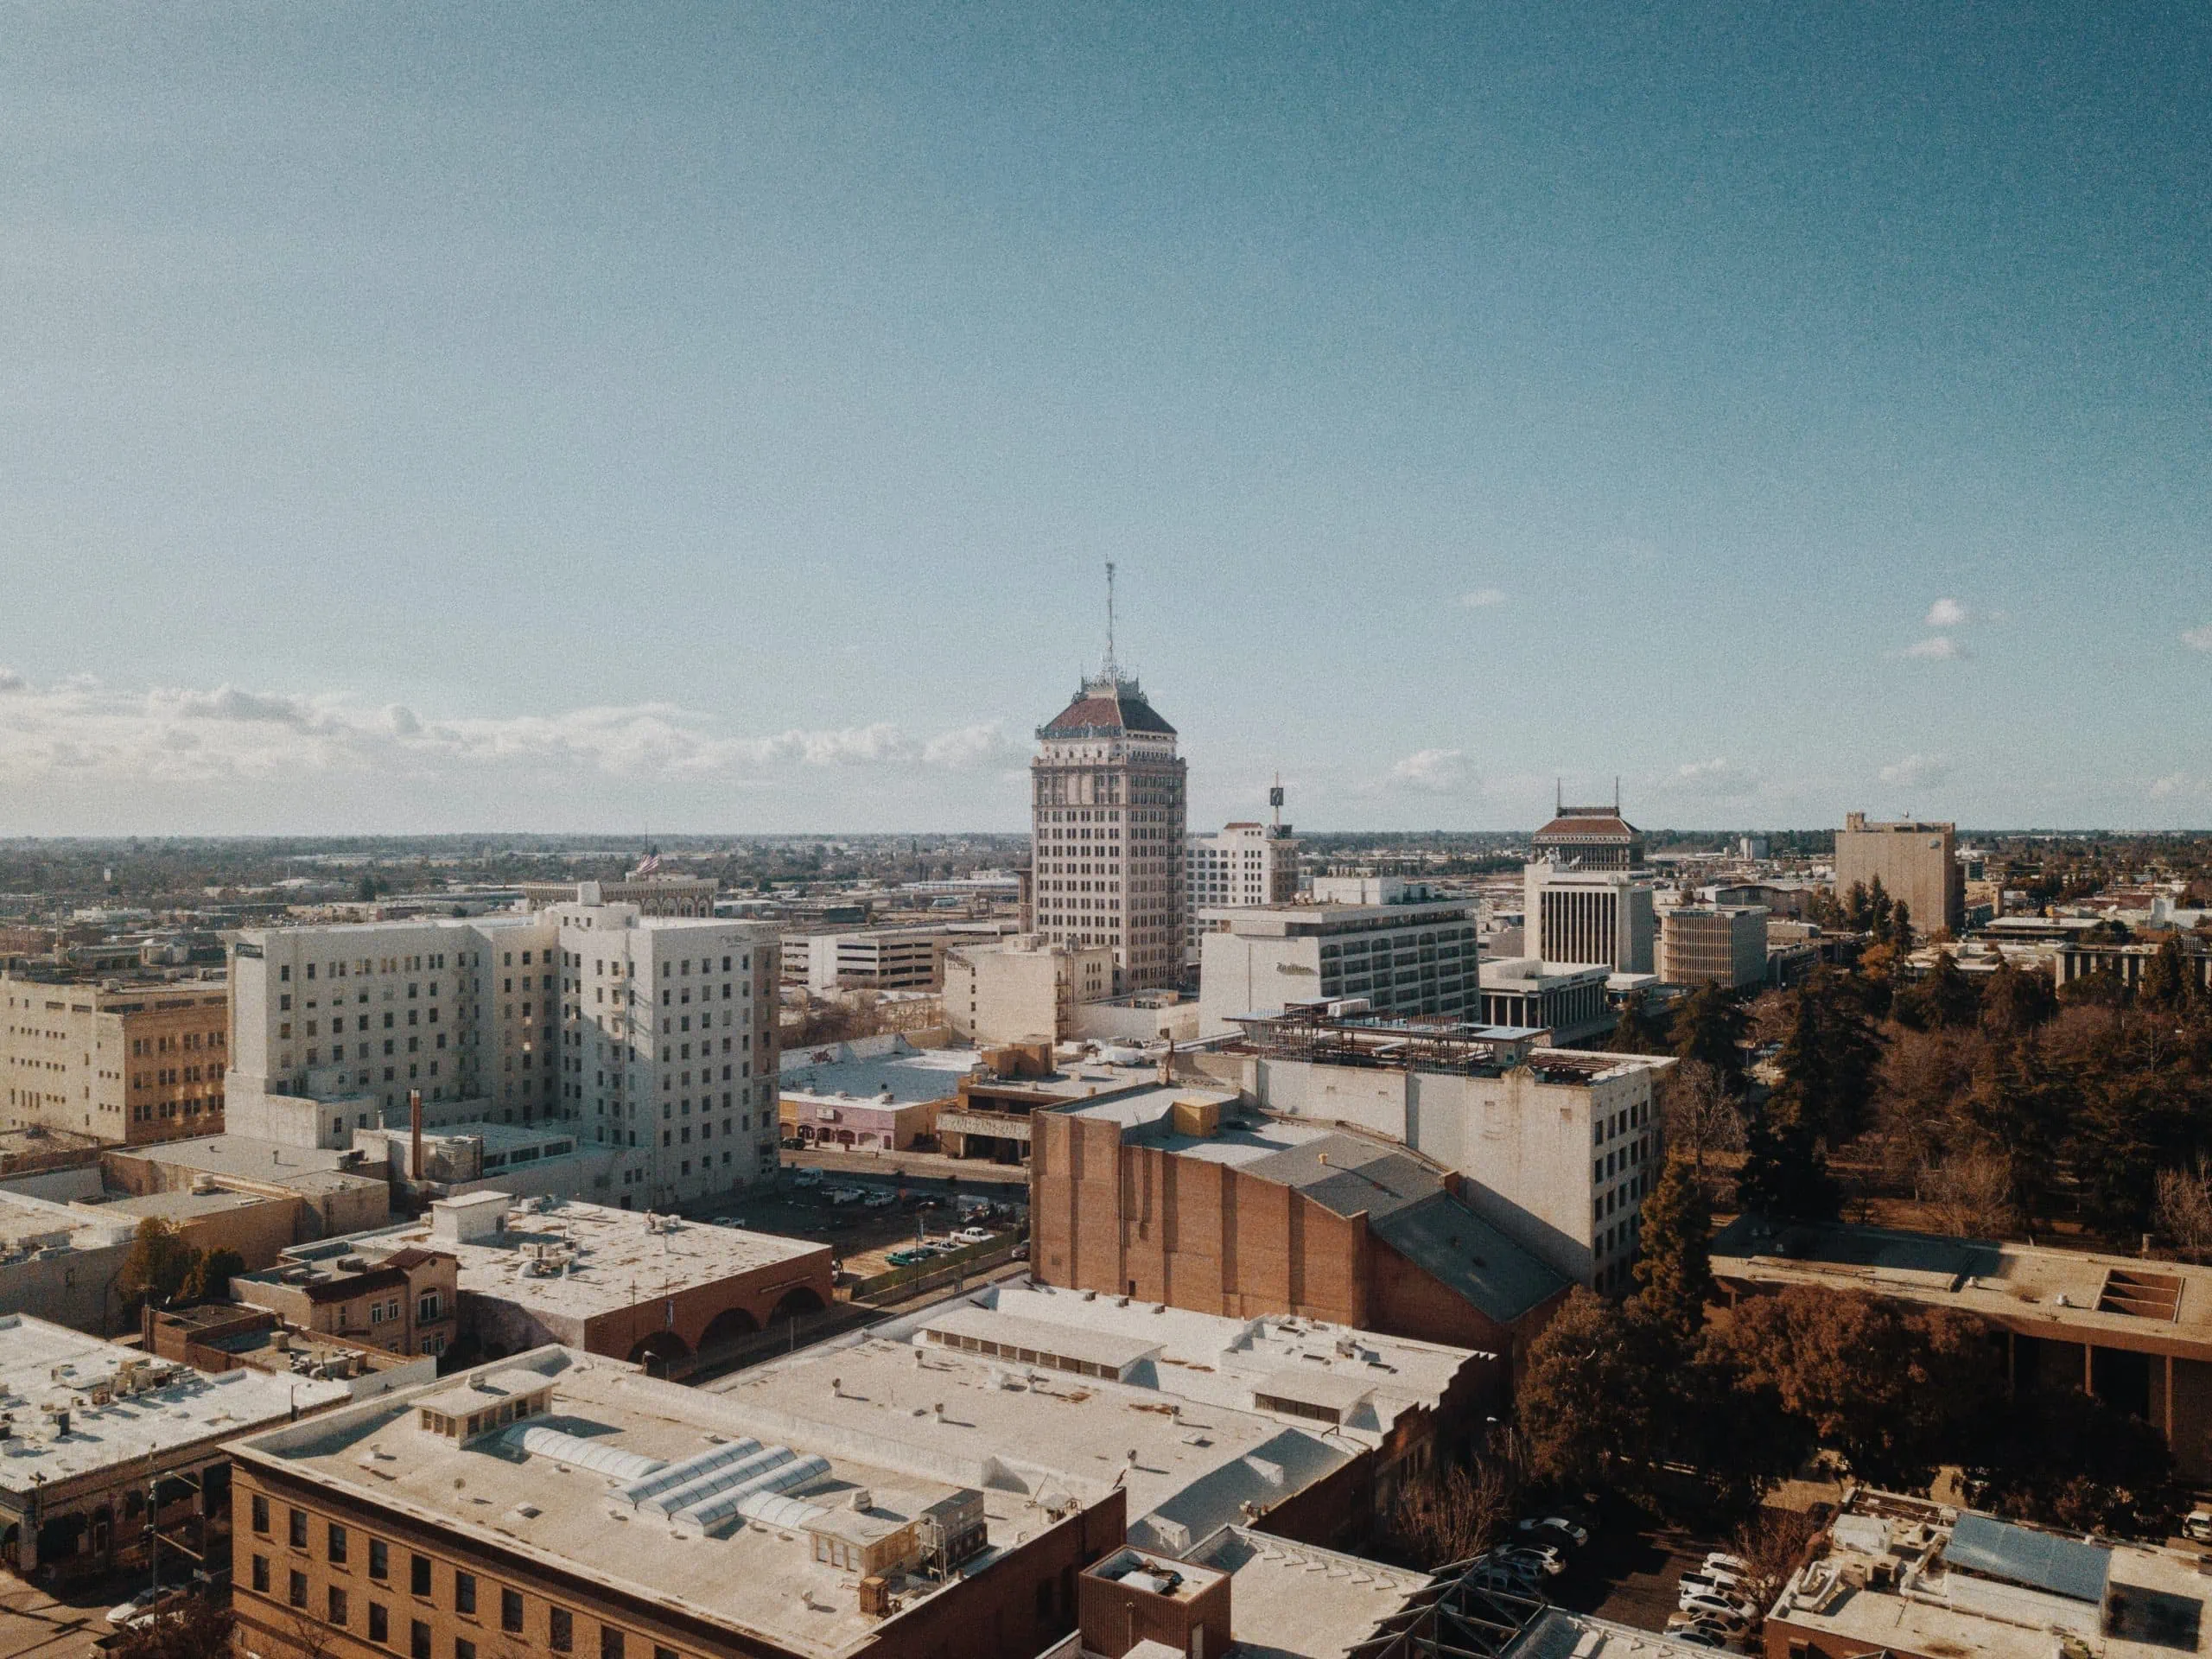 Skyline of Fresno, CA with enterprises that have security cameras